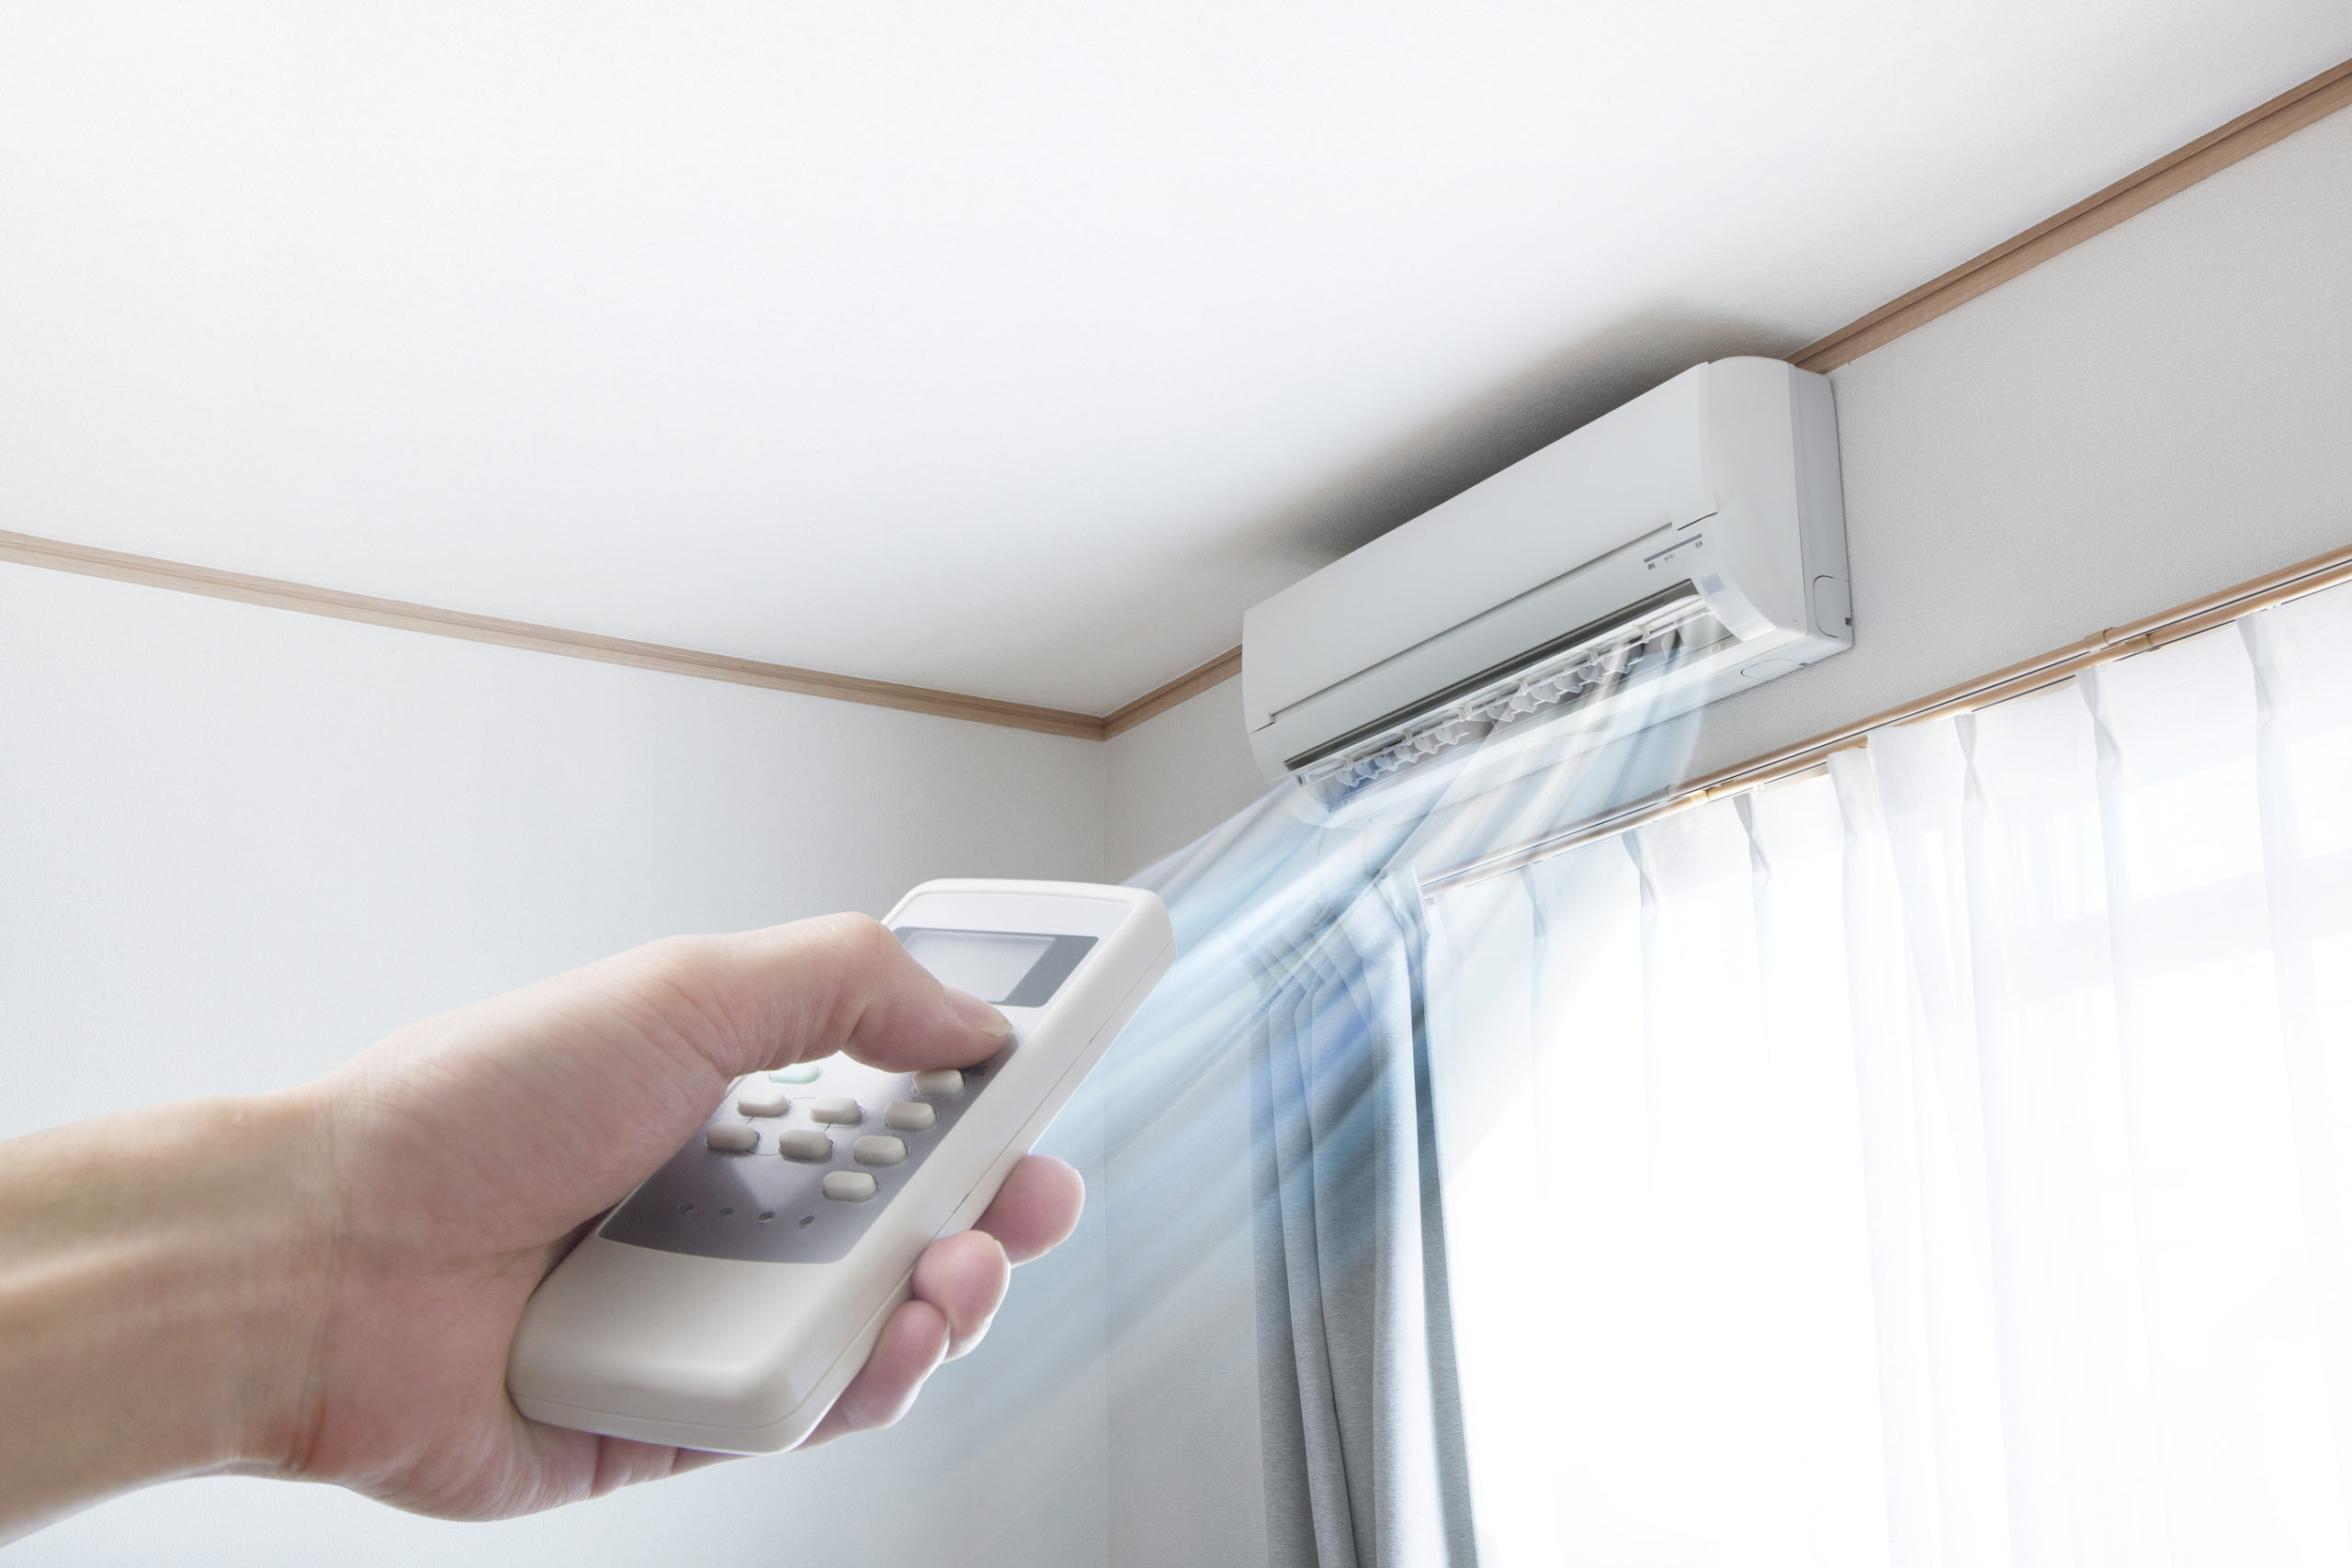 Ductless mini-split blowing cold air in home